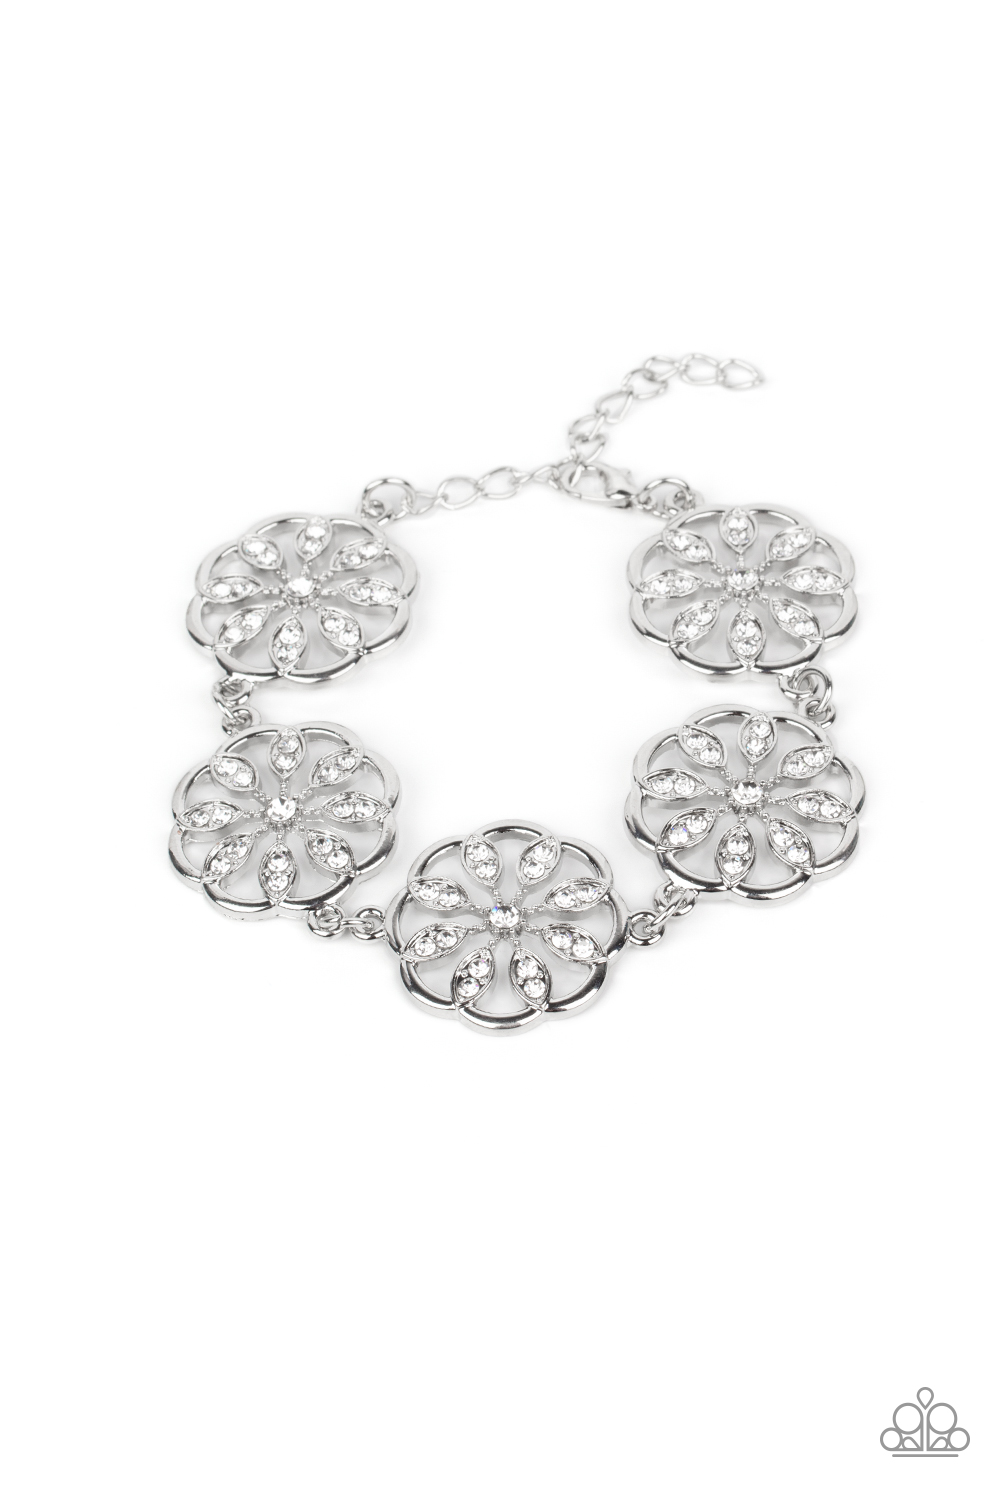 Paparazzi Accessories: Blooming Bling - White